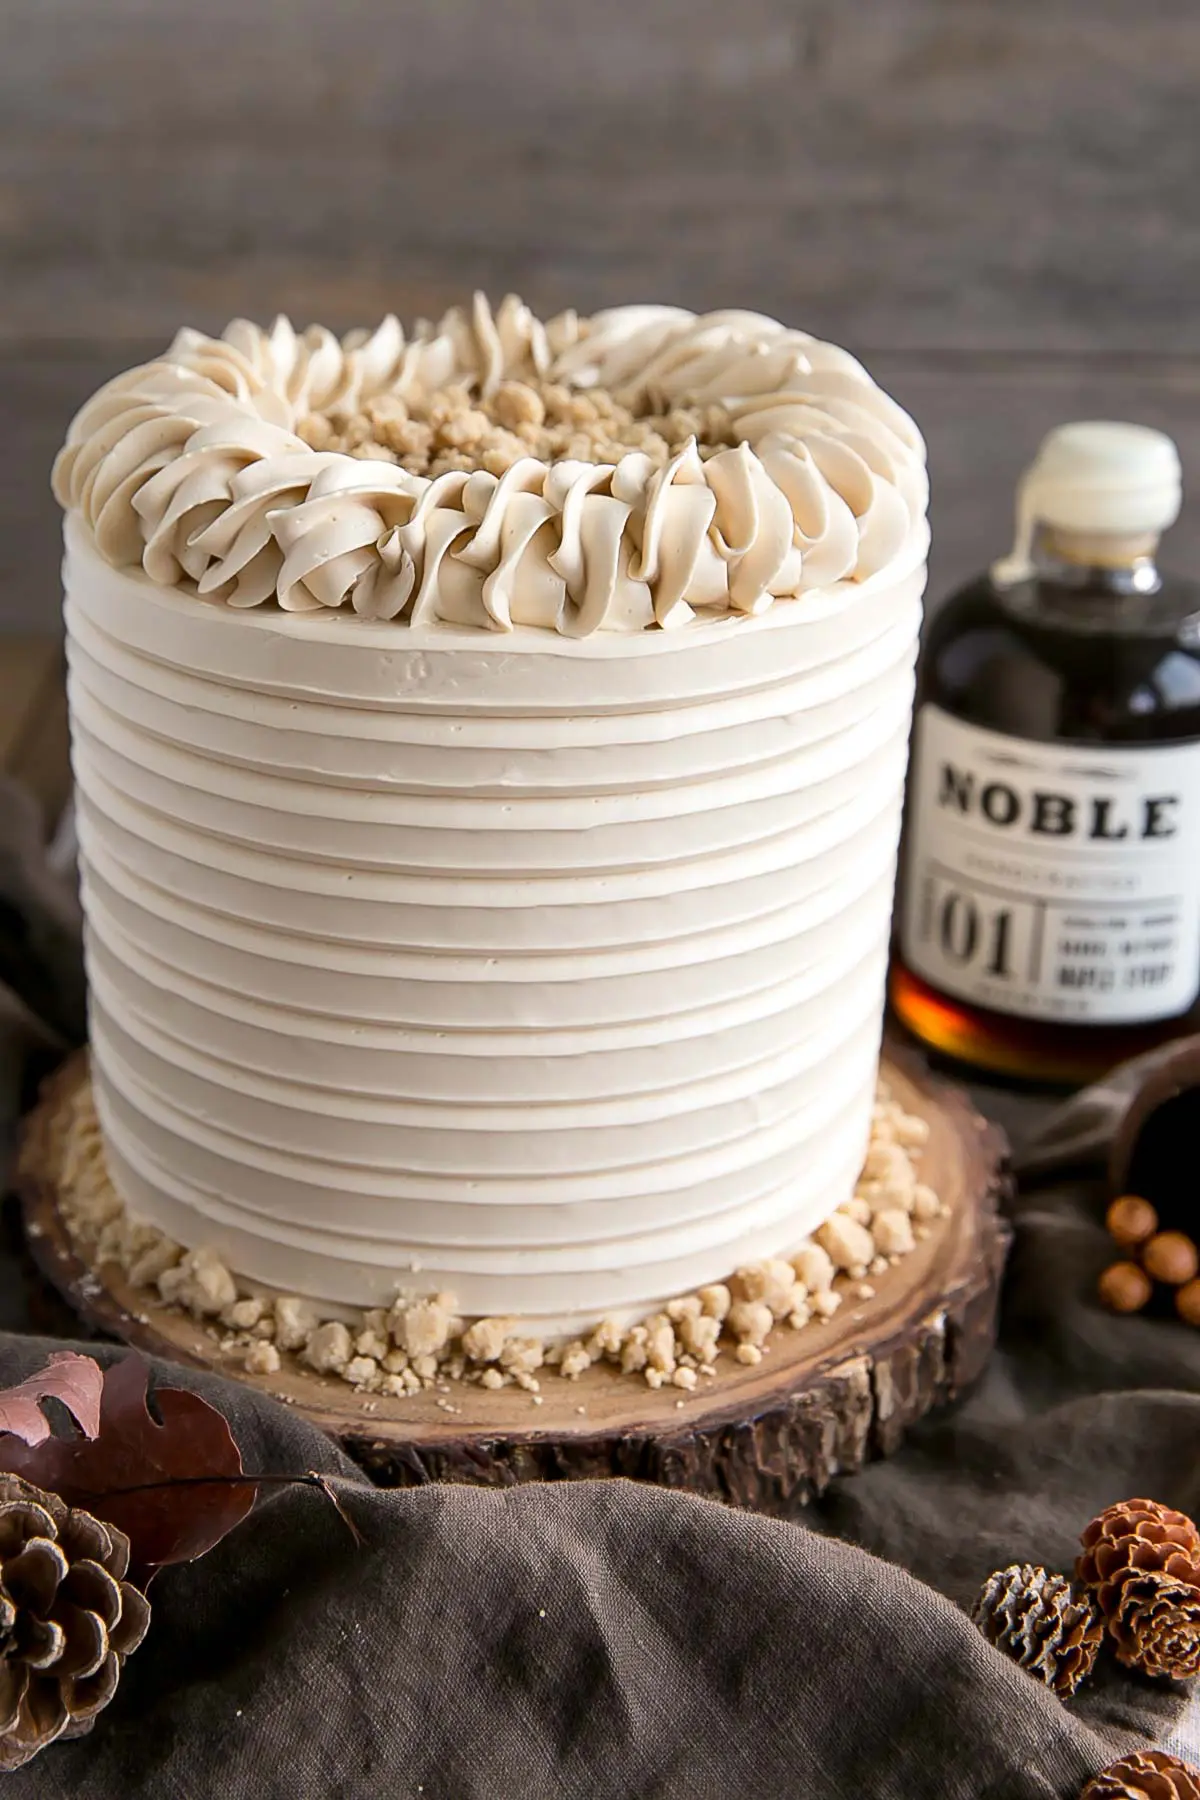 Maple layer cake made with pure maple syrup.